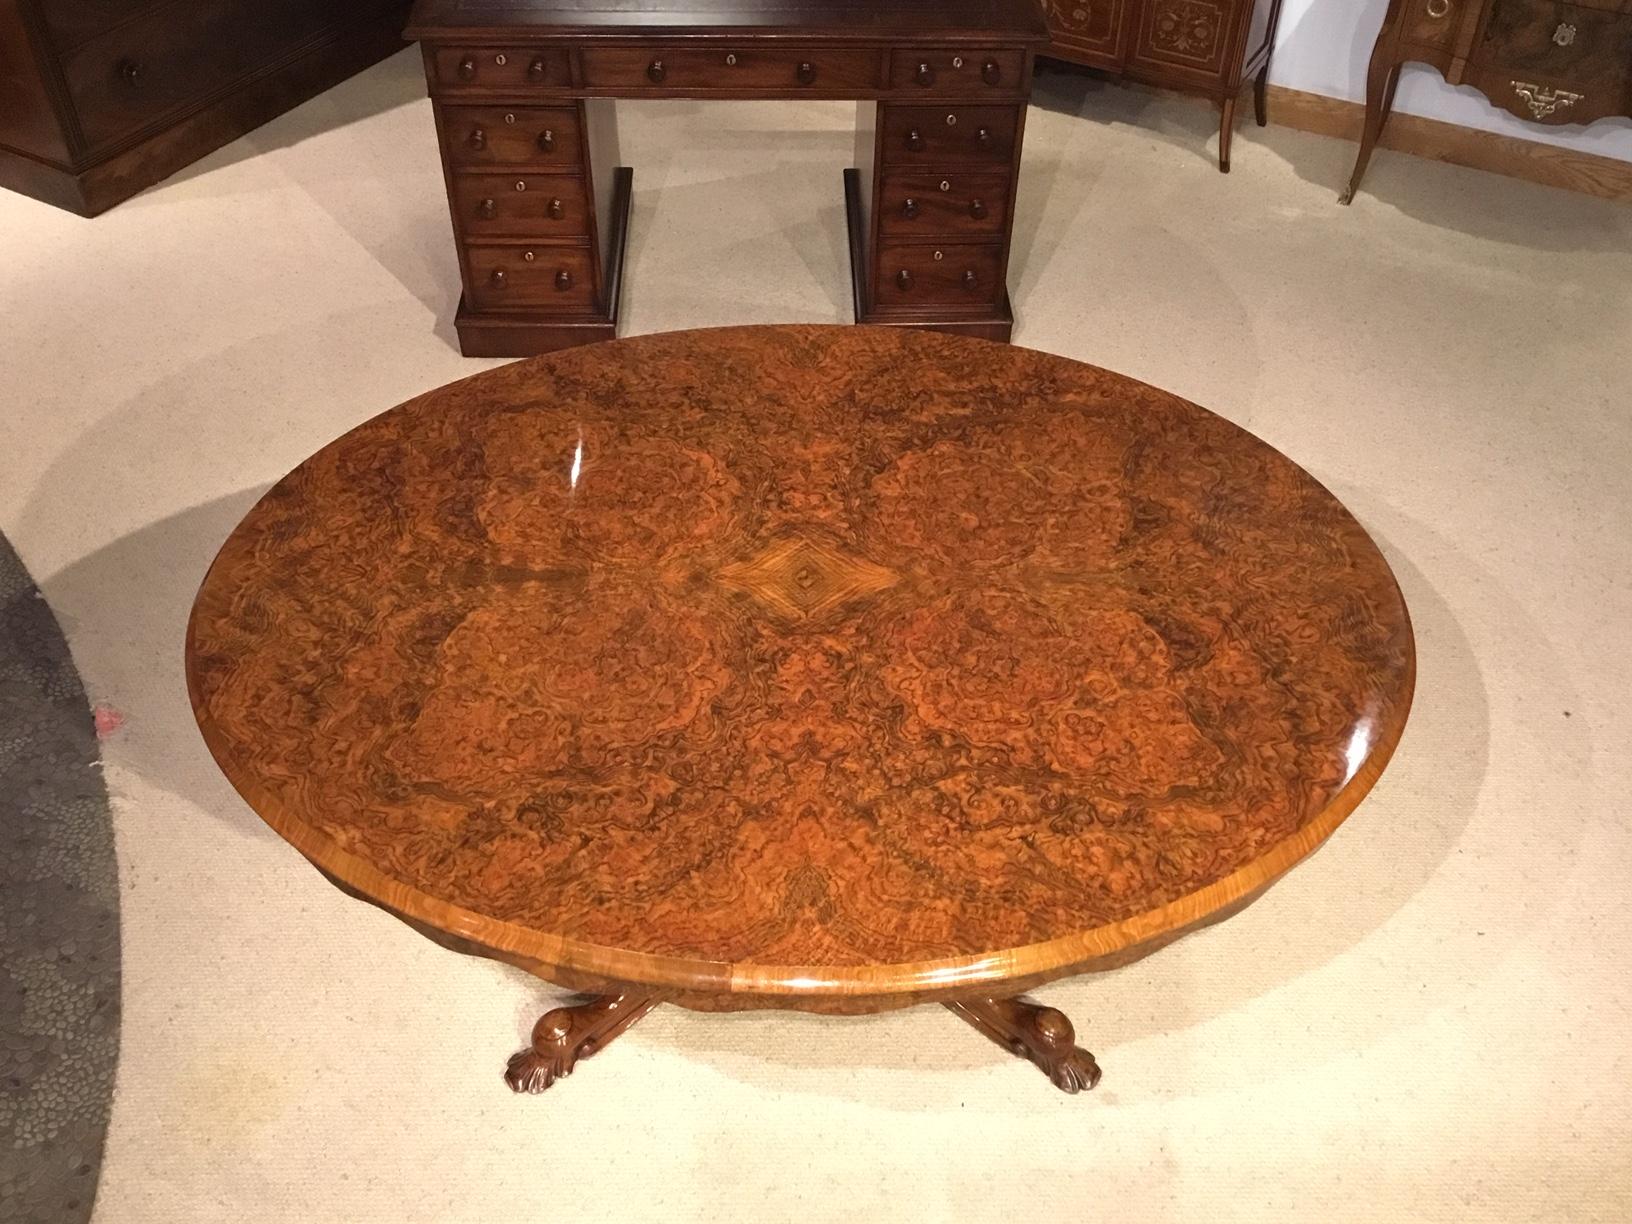 A burr walnut Victorian period breakfast/loo table. Having an oval tilting top veneered in beautifully figured burr walnut with a shaped burr walnut veneered frieze. Supported on a turned bulbous walnut column with four carved cabriole supports with